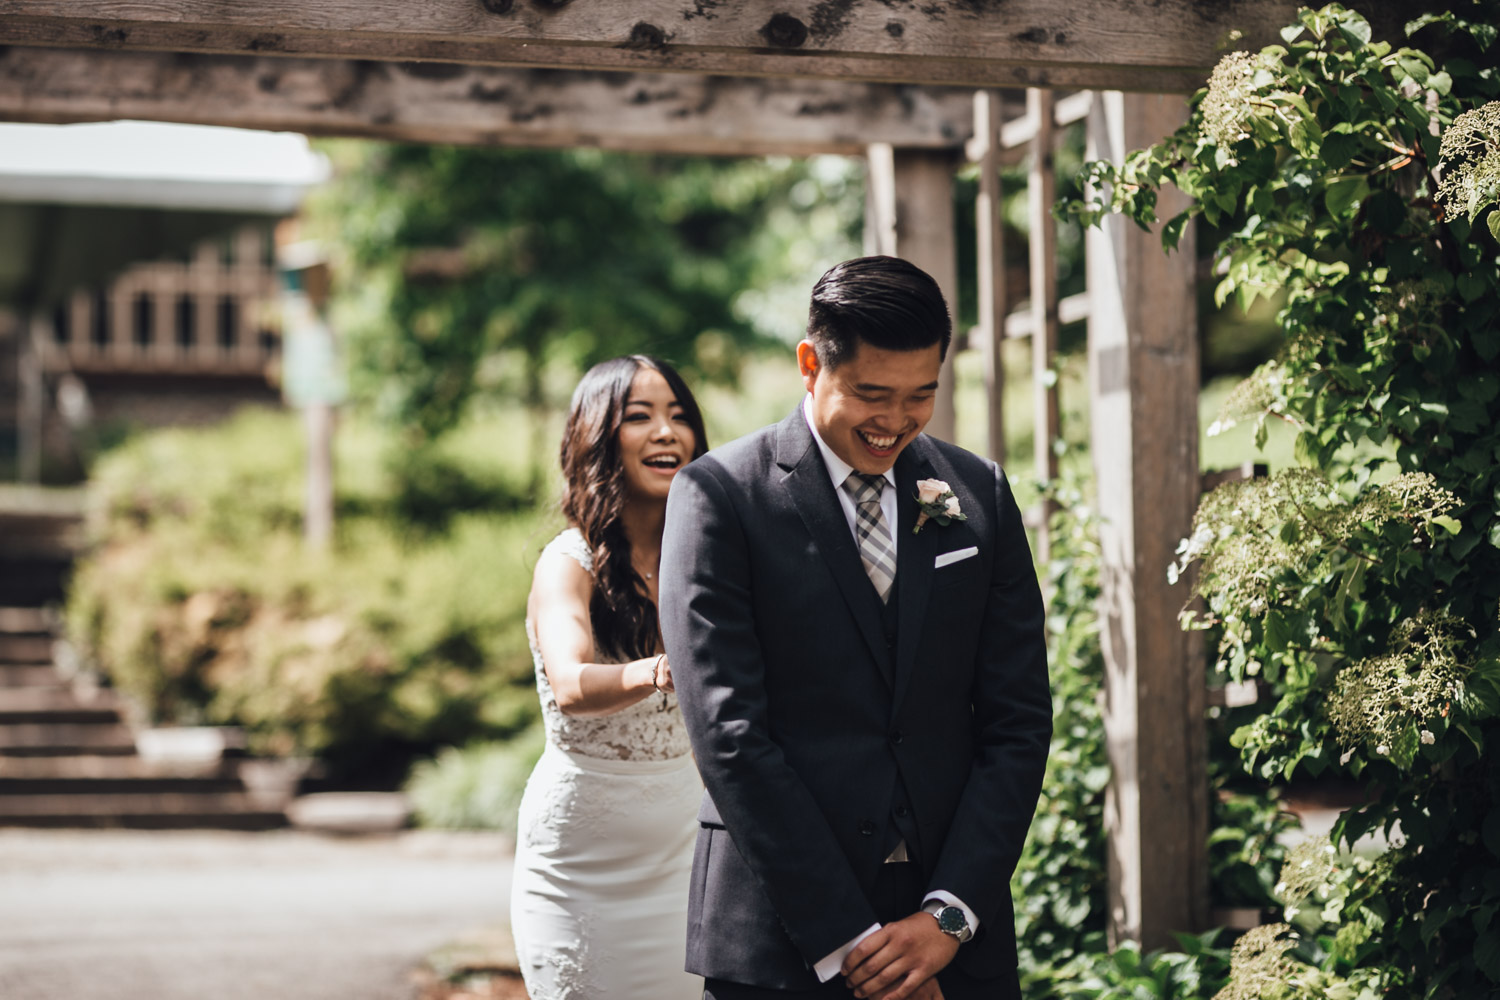 burnaby wedding photography at deer lake park bride and groom portraits first look